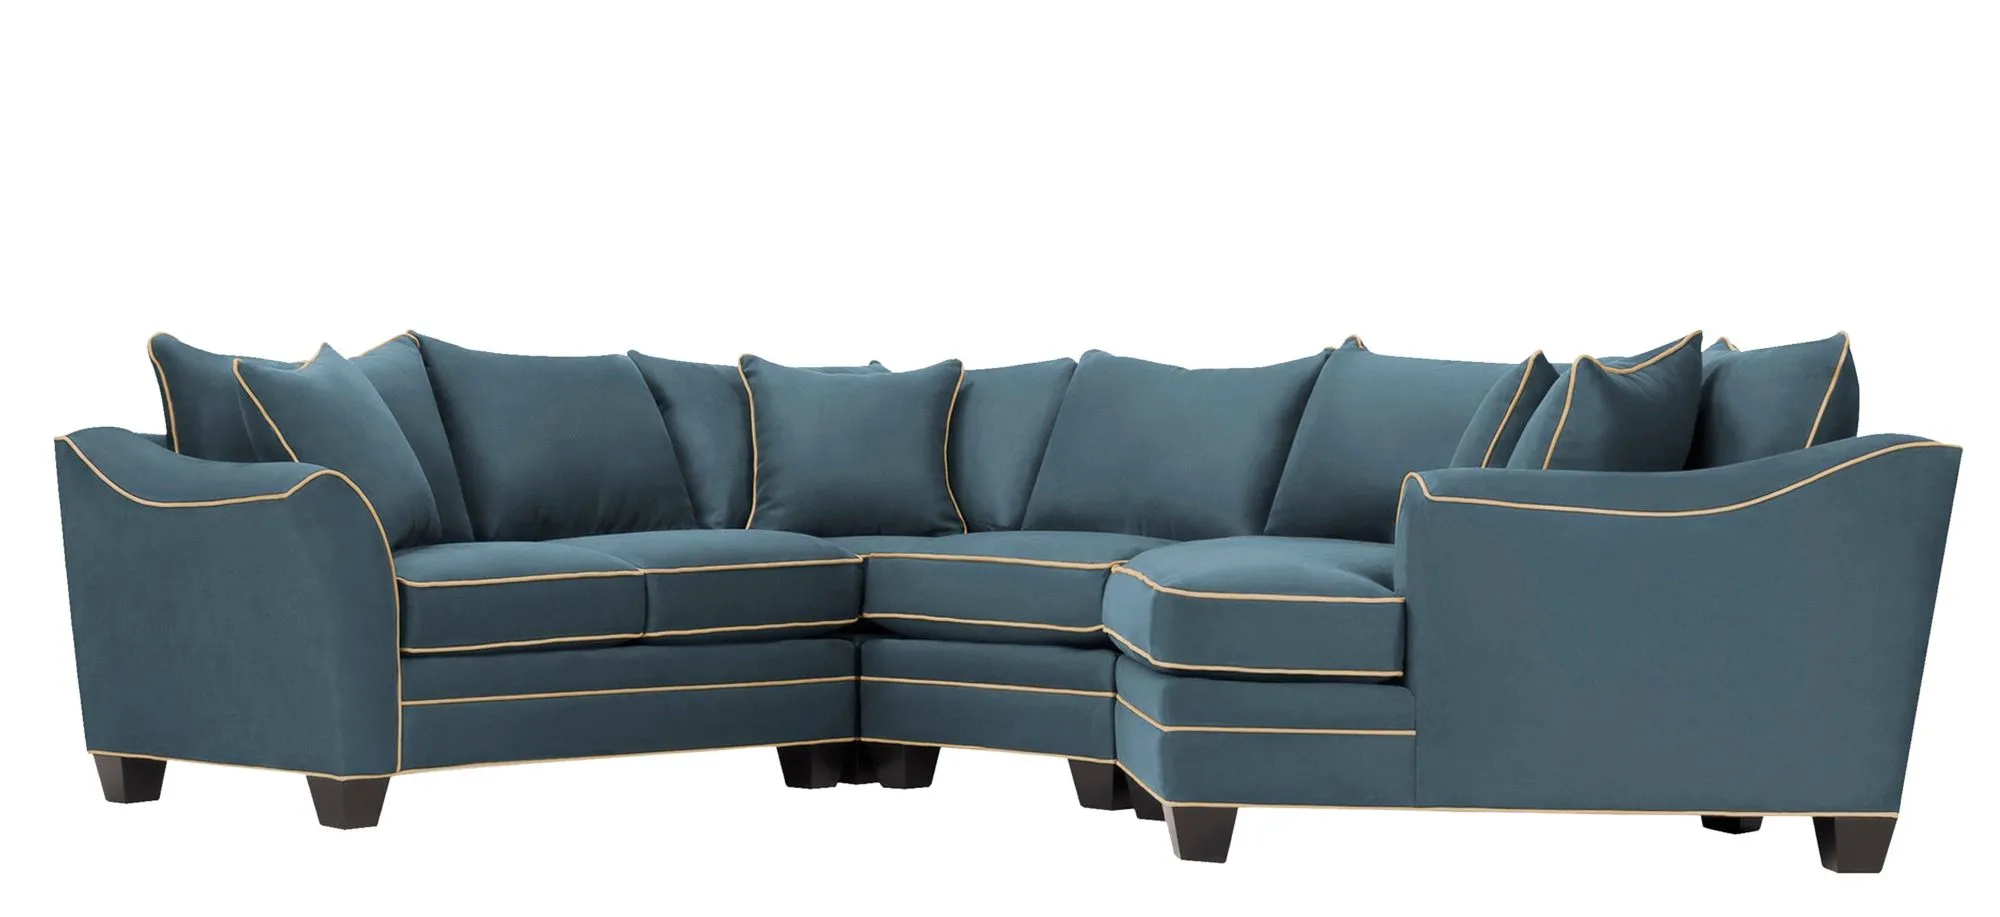 Foresthill 4-pc. Right Hand Cuddler Sectional Sofa in Suede So Soft Indigo/Mineral by H.M. Richards